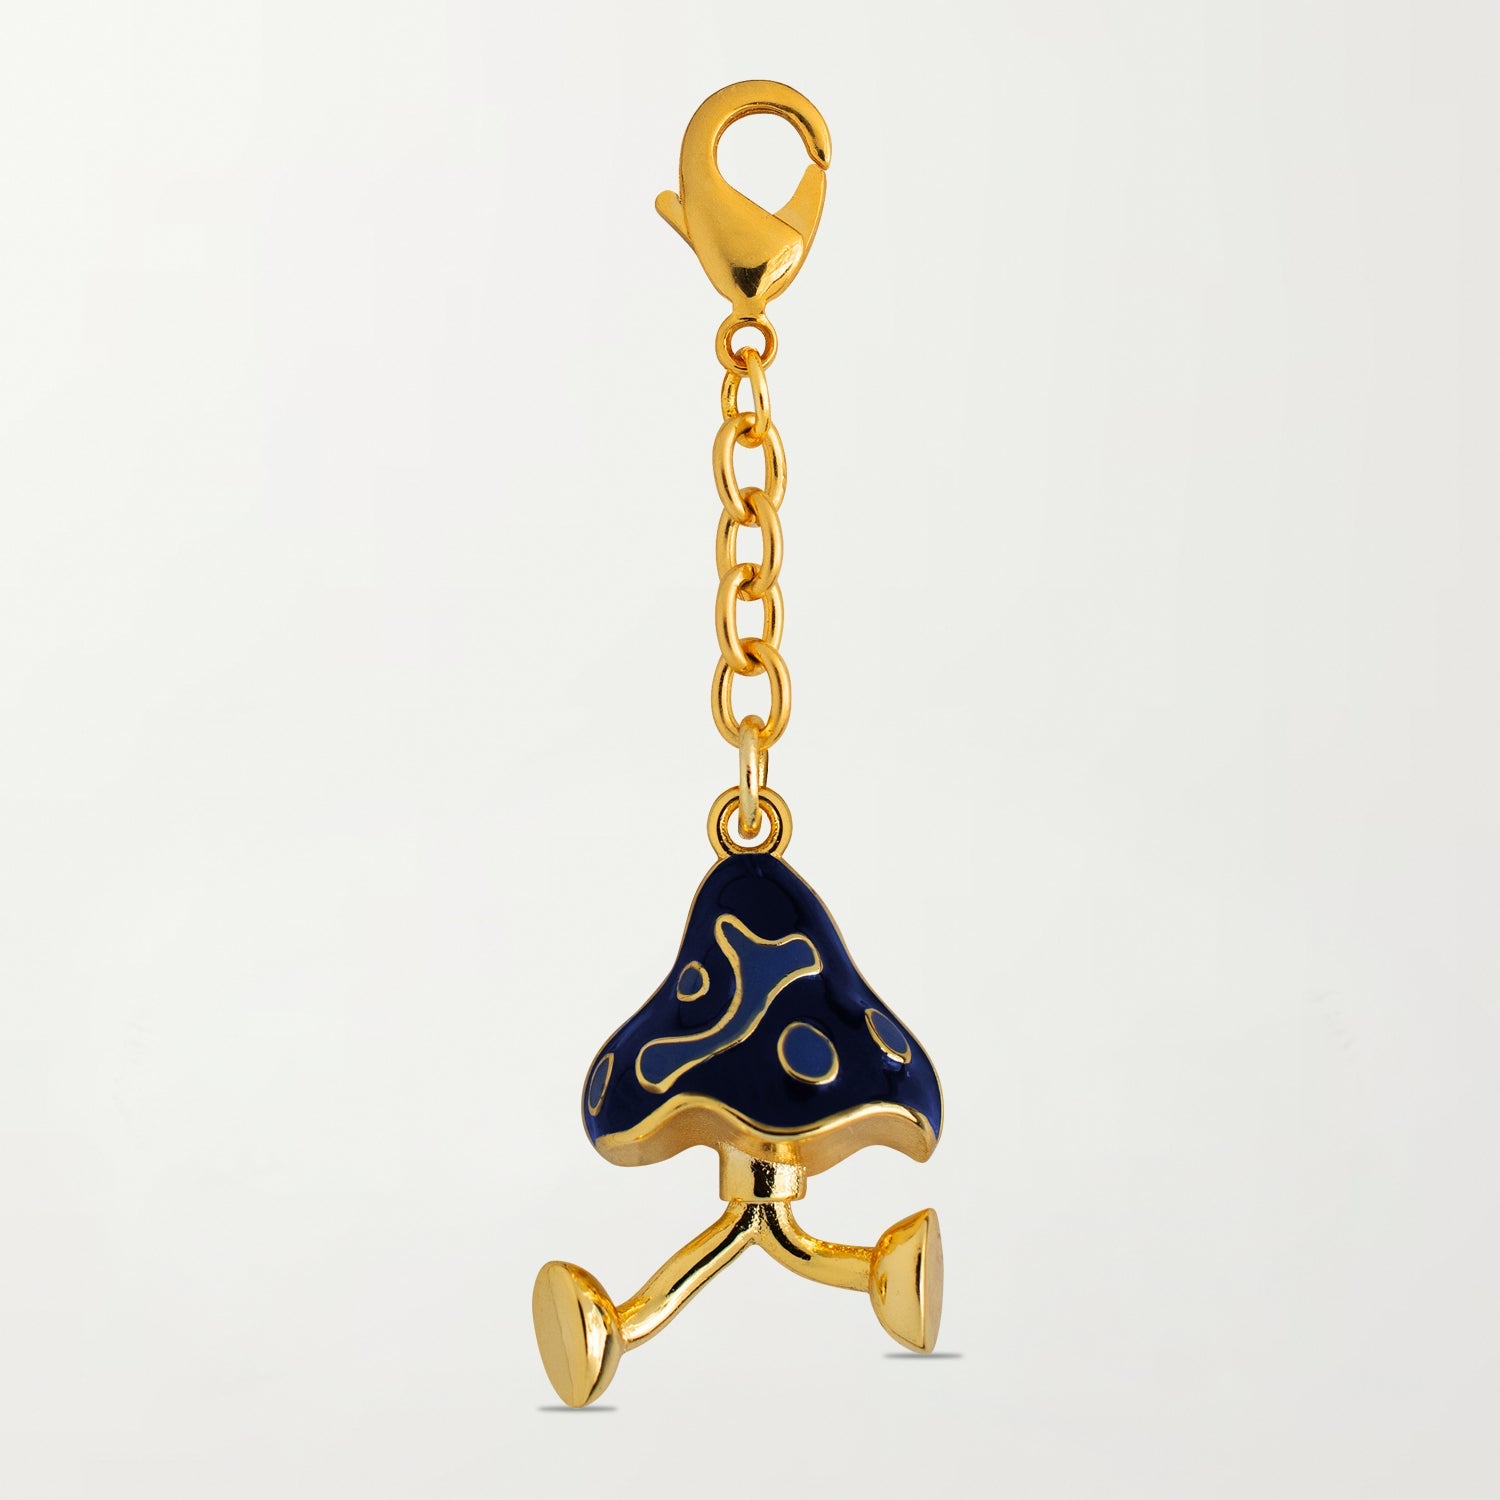 Picture of The Multiverse Mushroom Charm